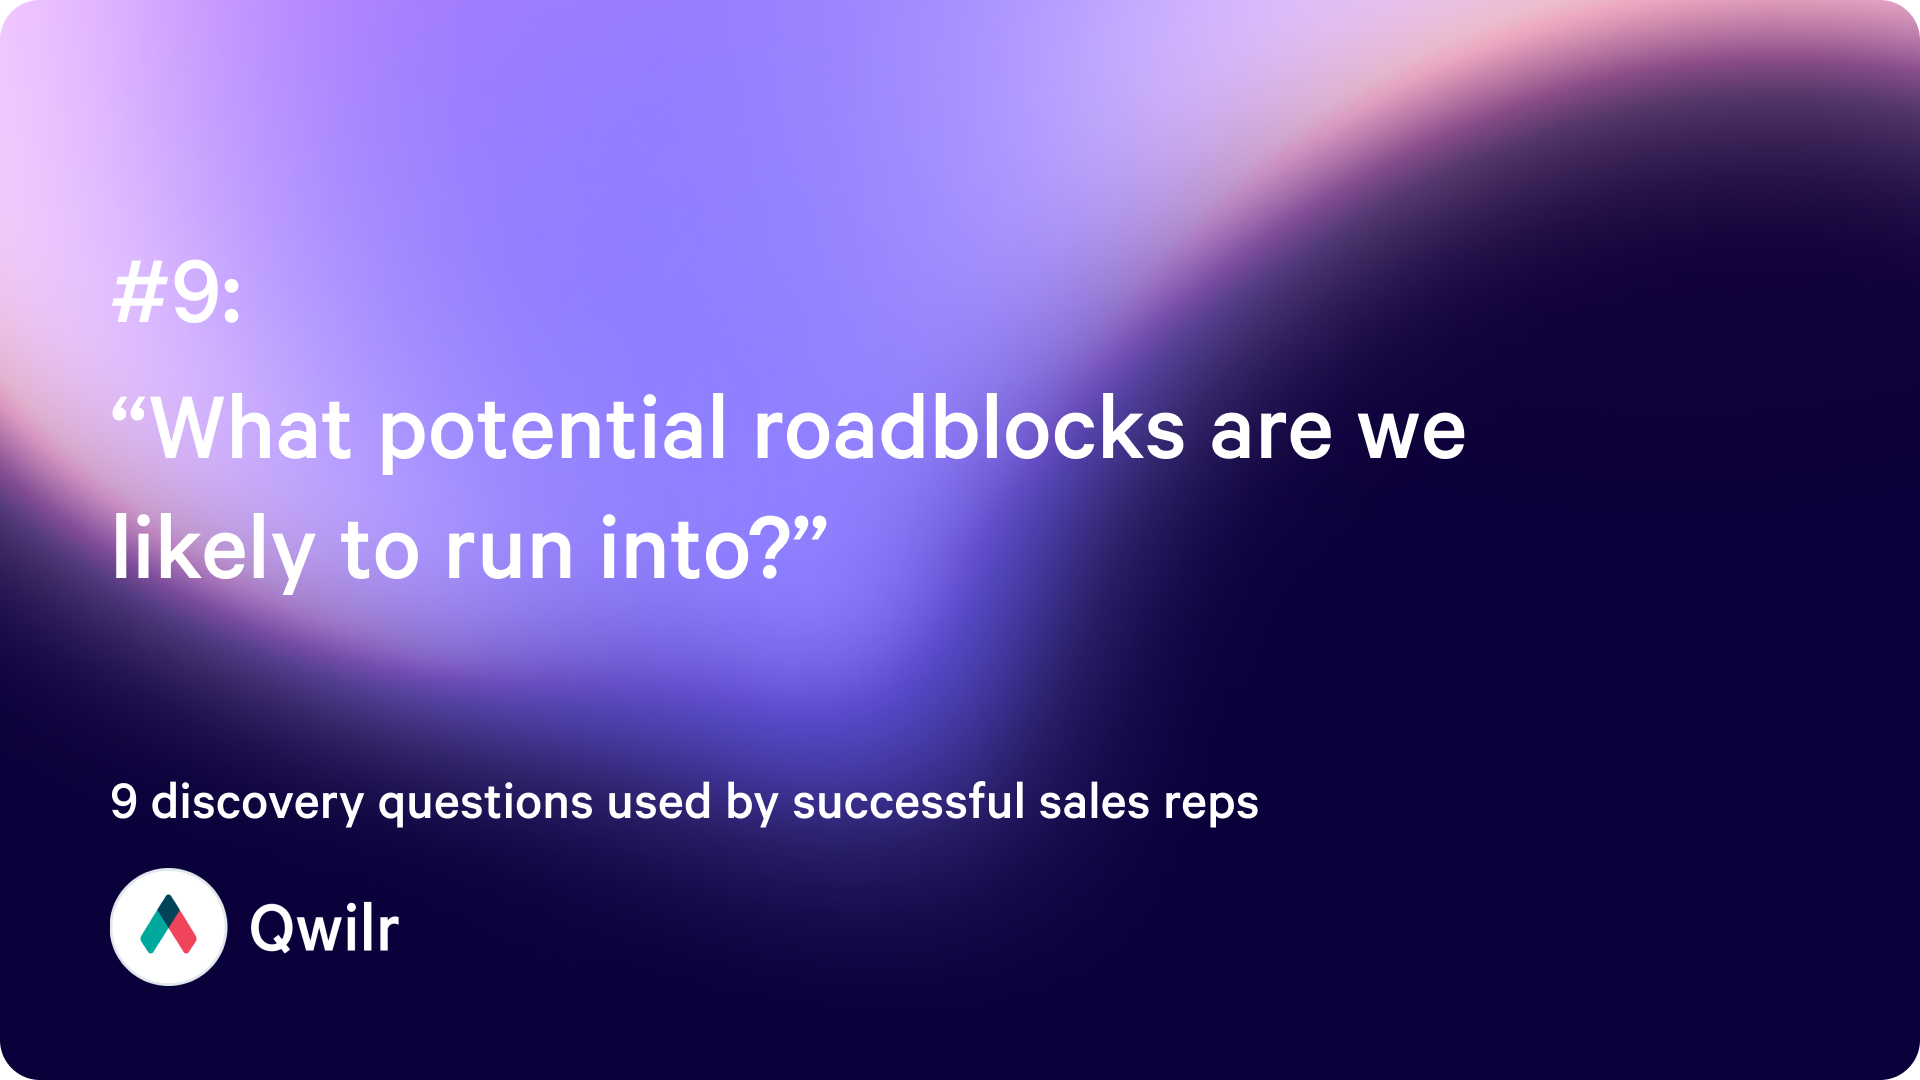 “What potential roadblocks are we likely to run into?”